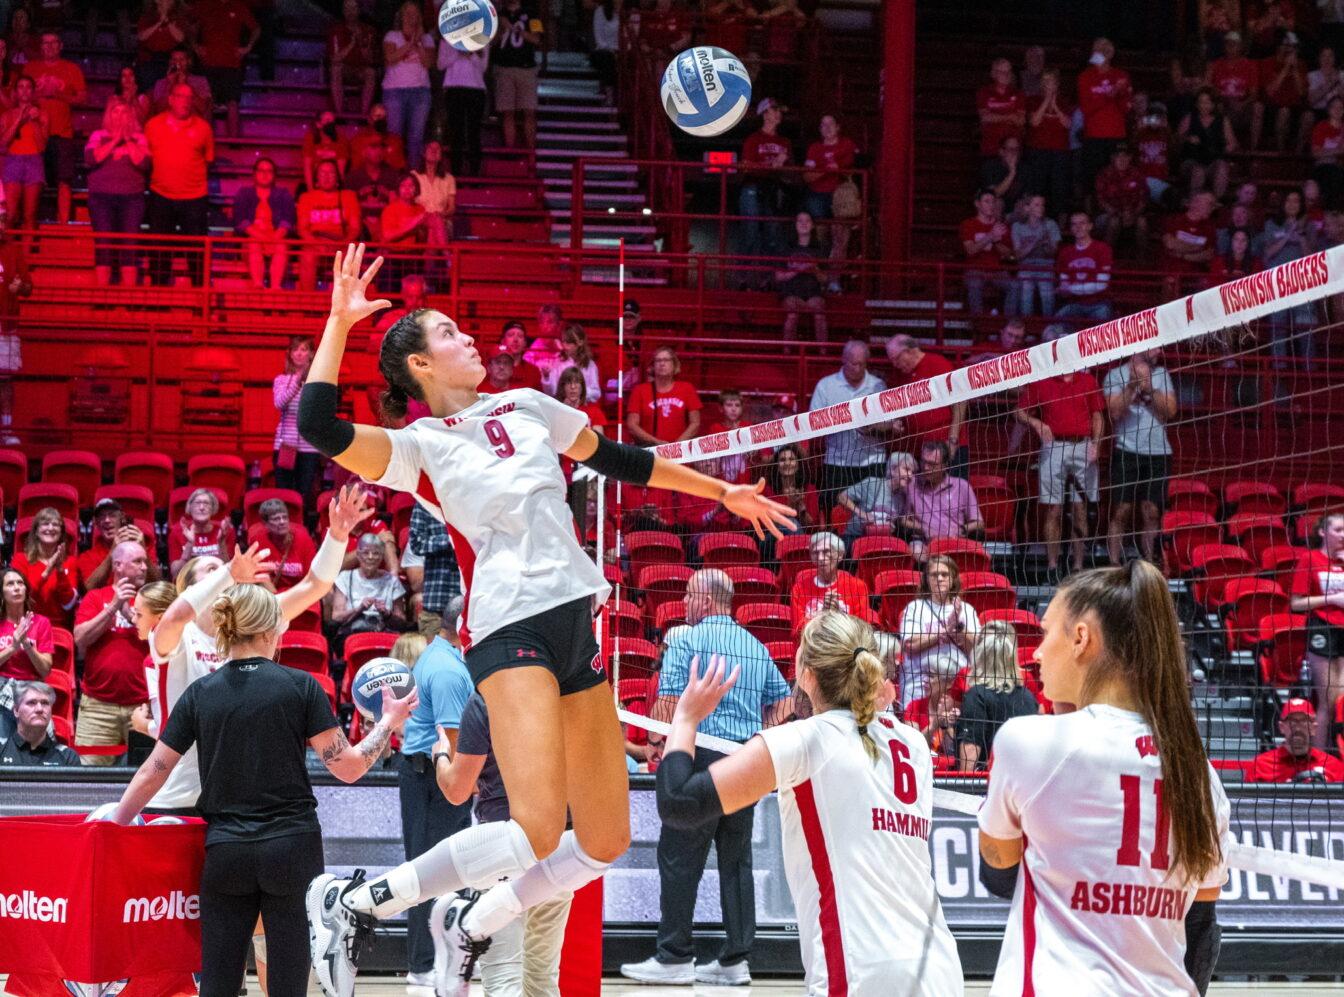 Volleyball%3A+Texas+eliminates+Wisconsin+in+Final+Four+behind+service%2C+defensive+play